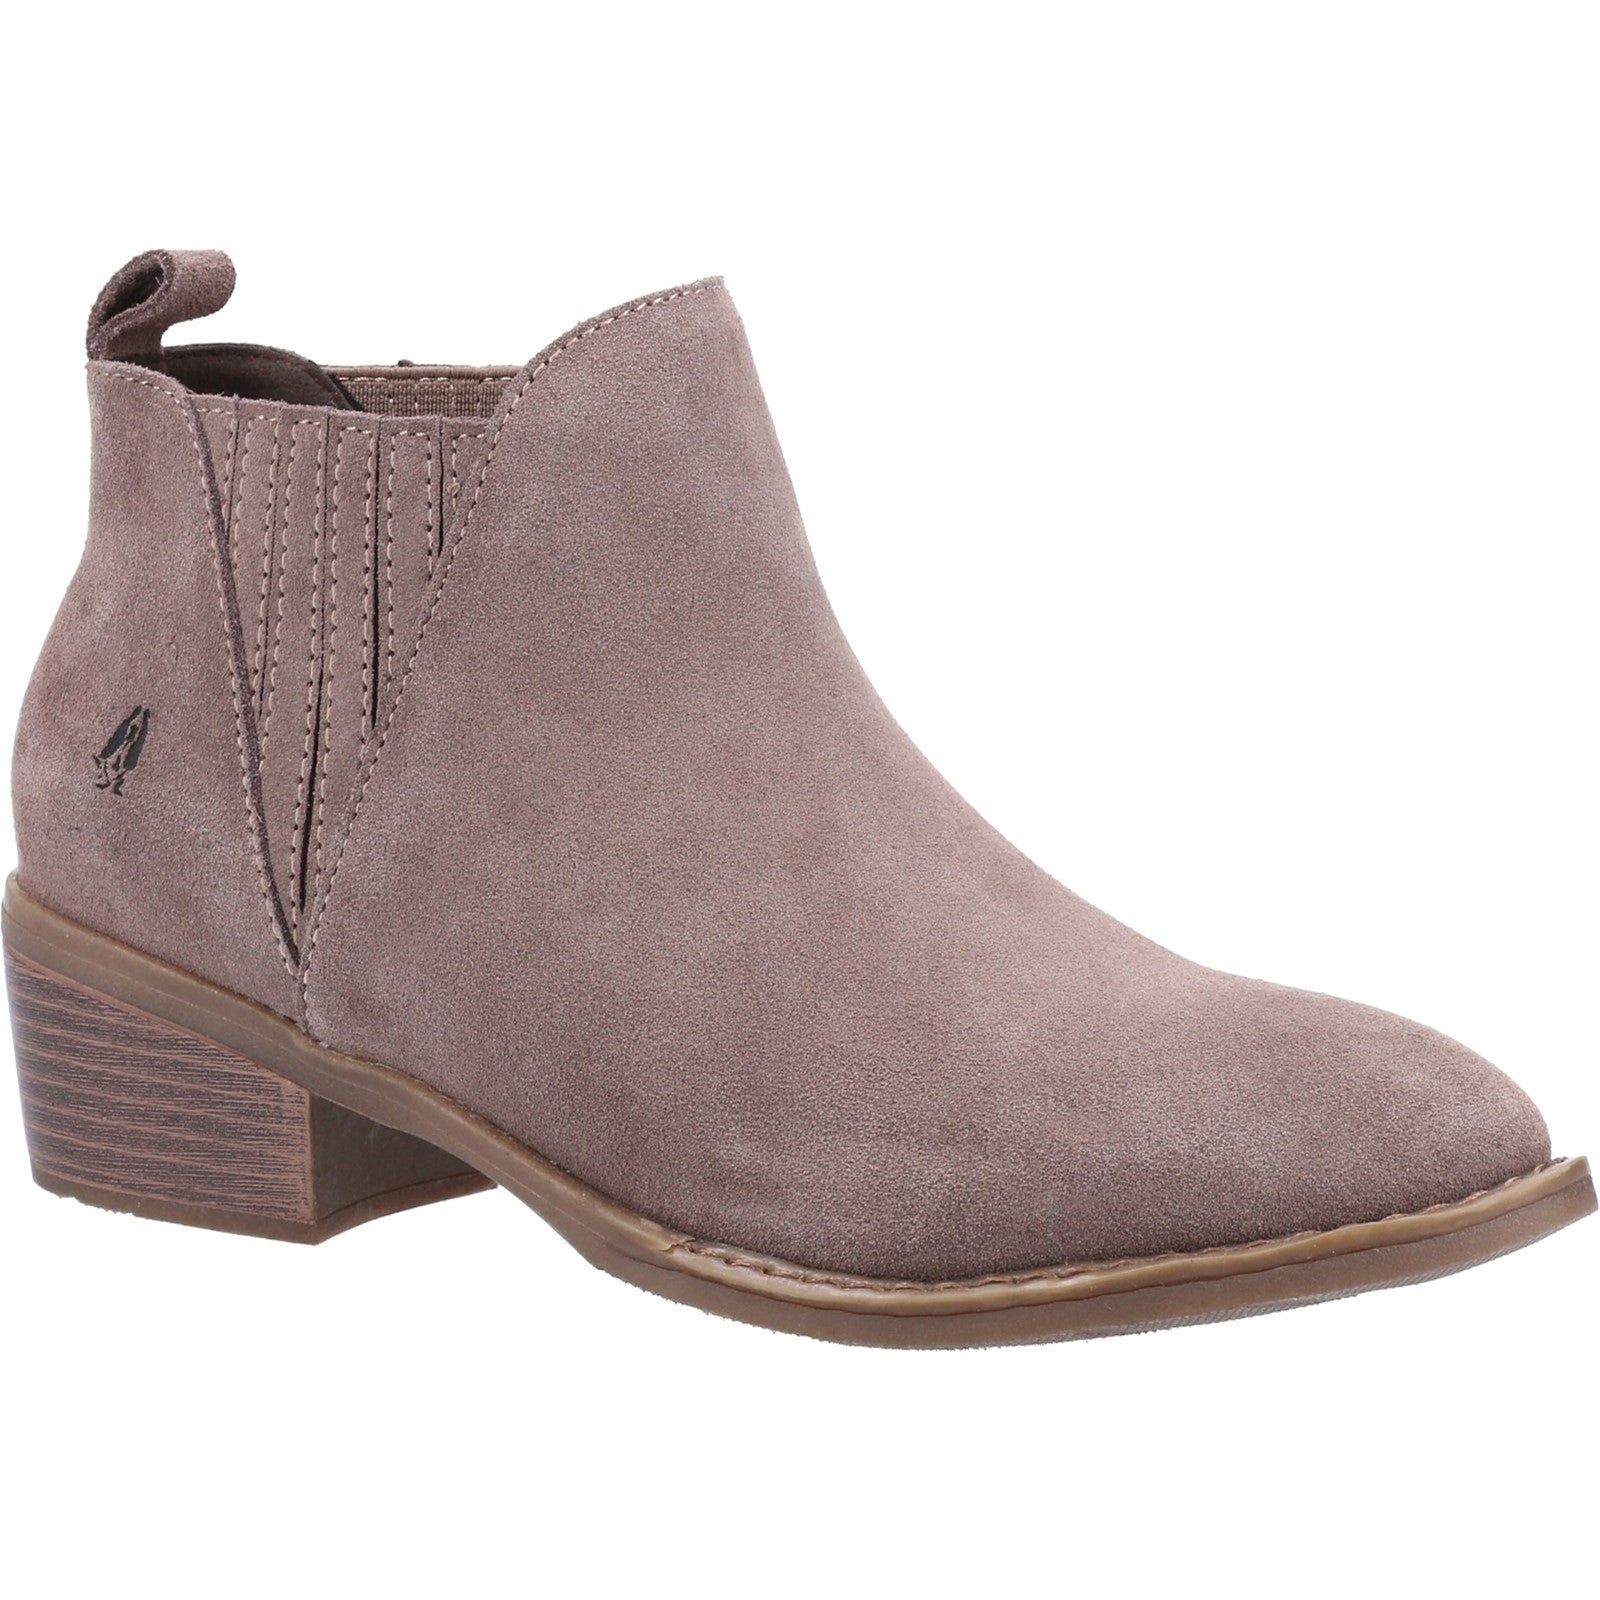 Ladies Ankle Boots Taupe Hush Puppies Isobel Ankle Boot